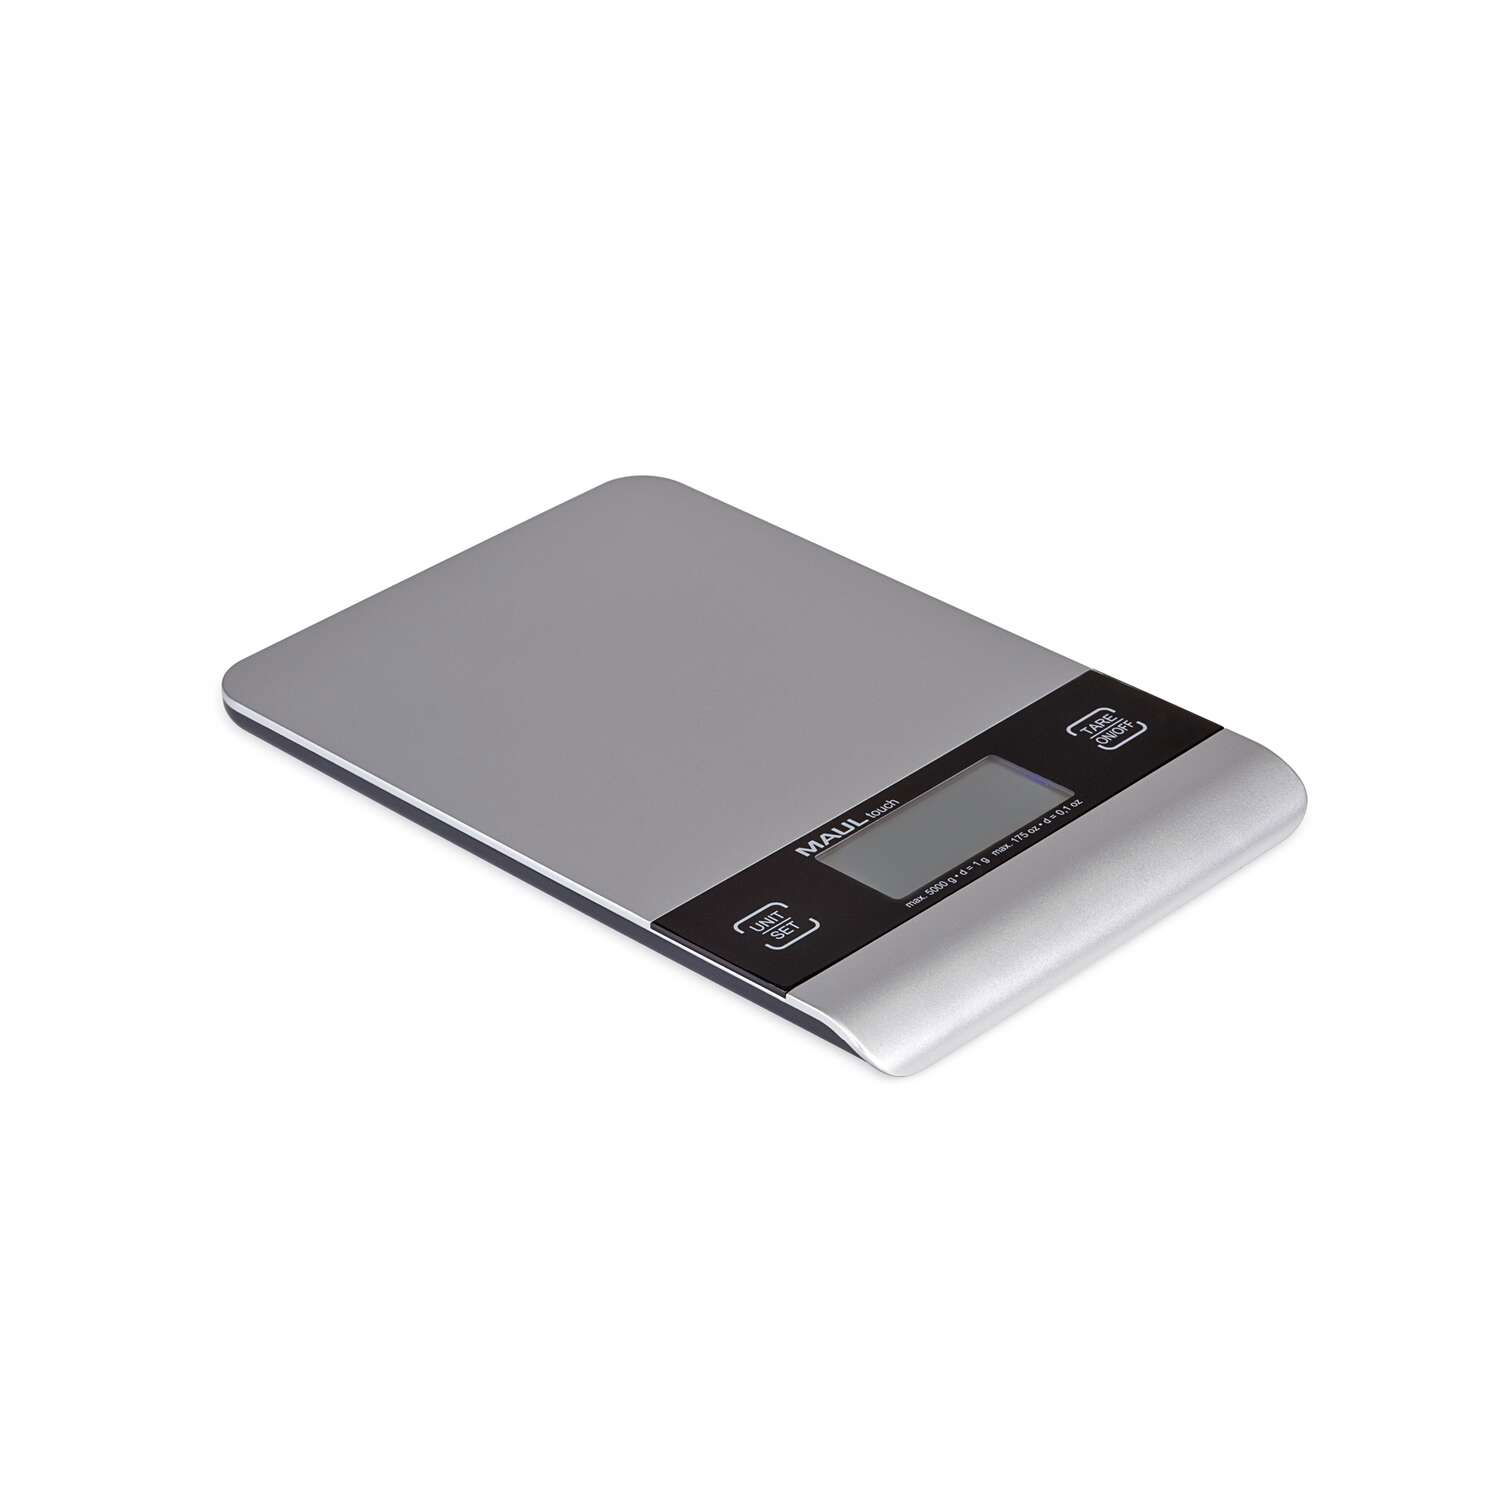 Briefwaage MAULtouch mit Batterie, 5000 g